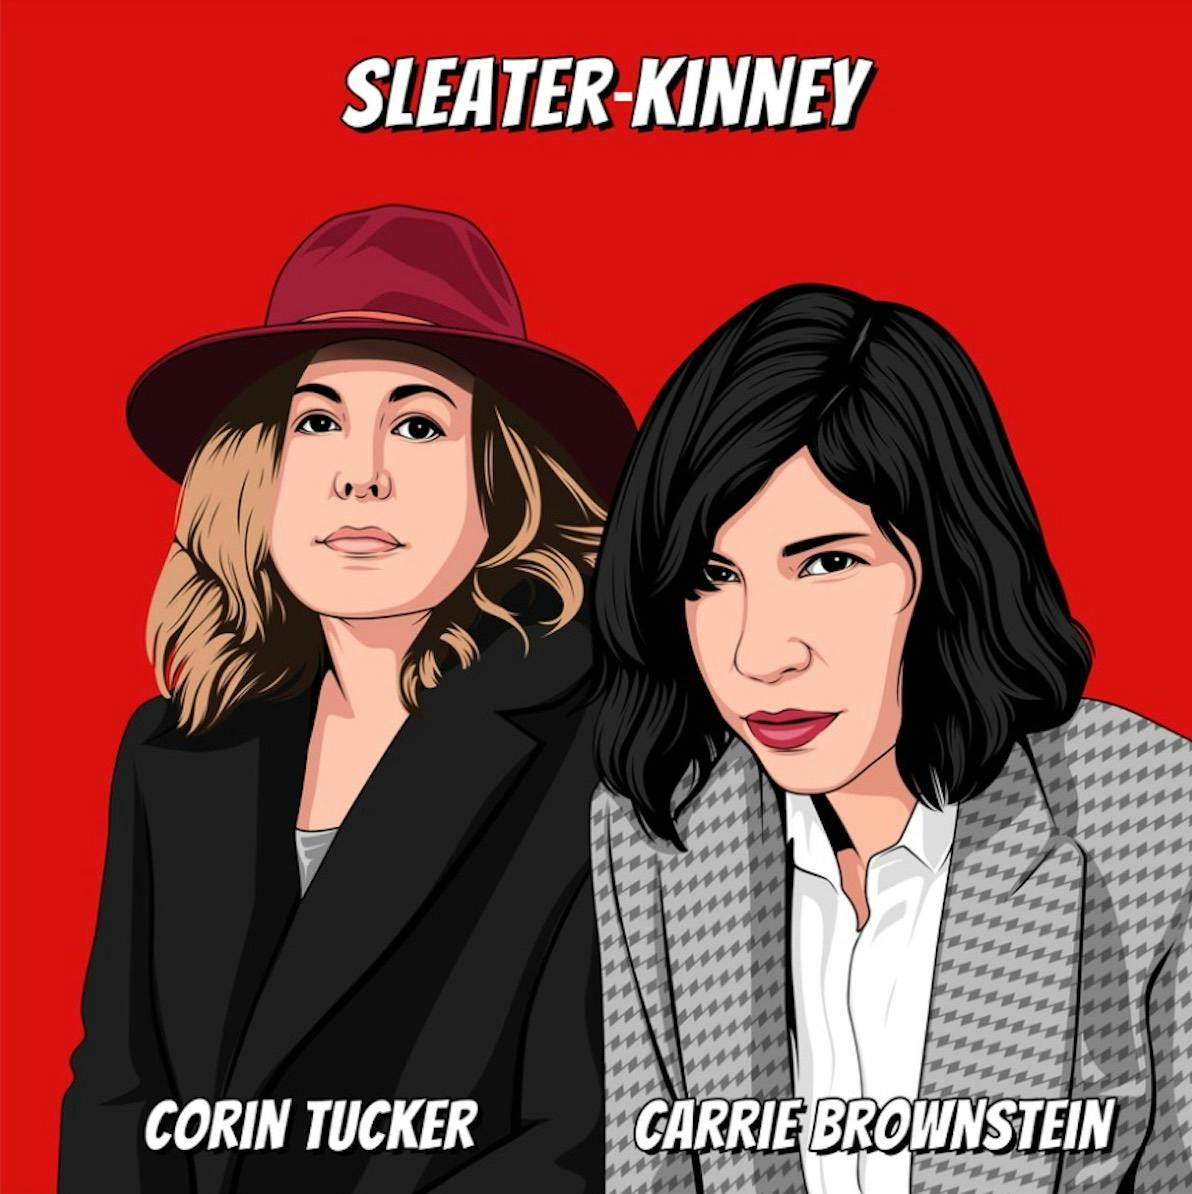 Rock 'n' Roll Re-Creation: Sleater-Kinney’s Carrie Brownstein and Corin Tucker